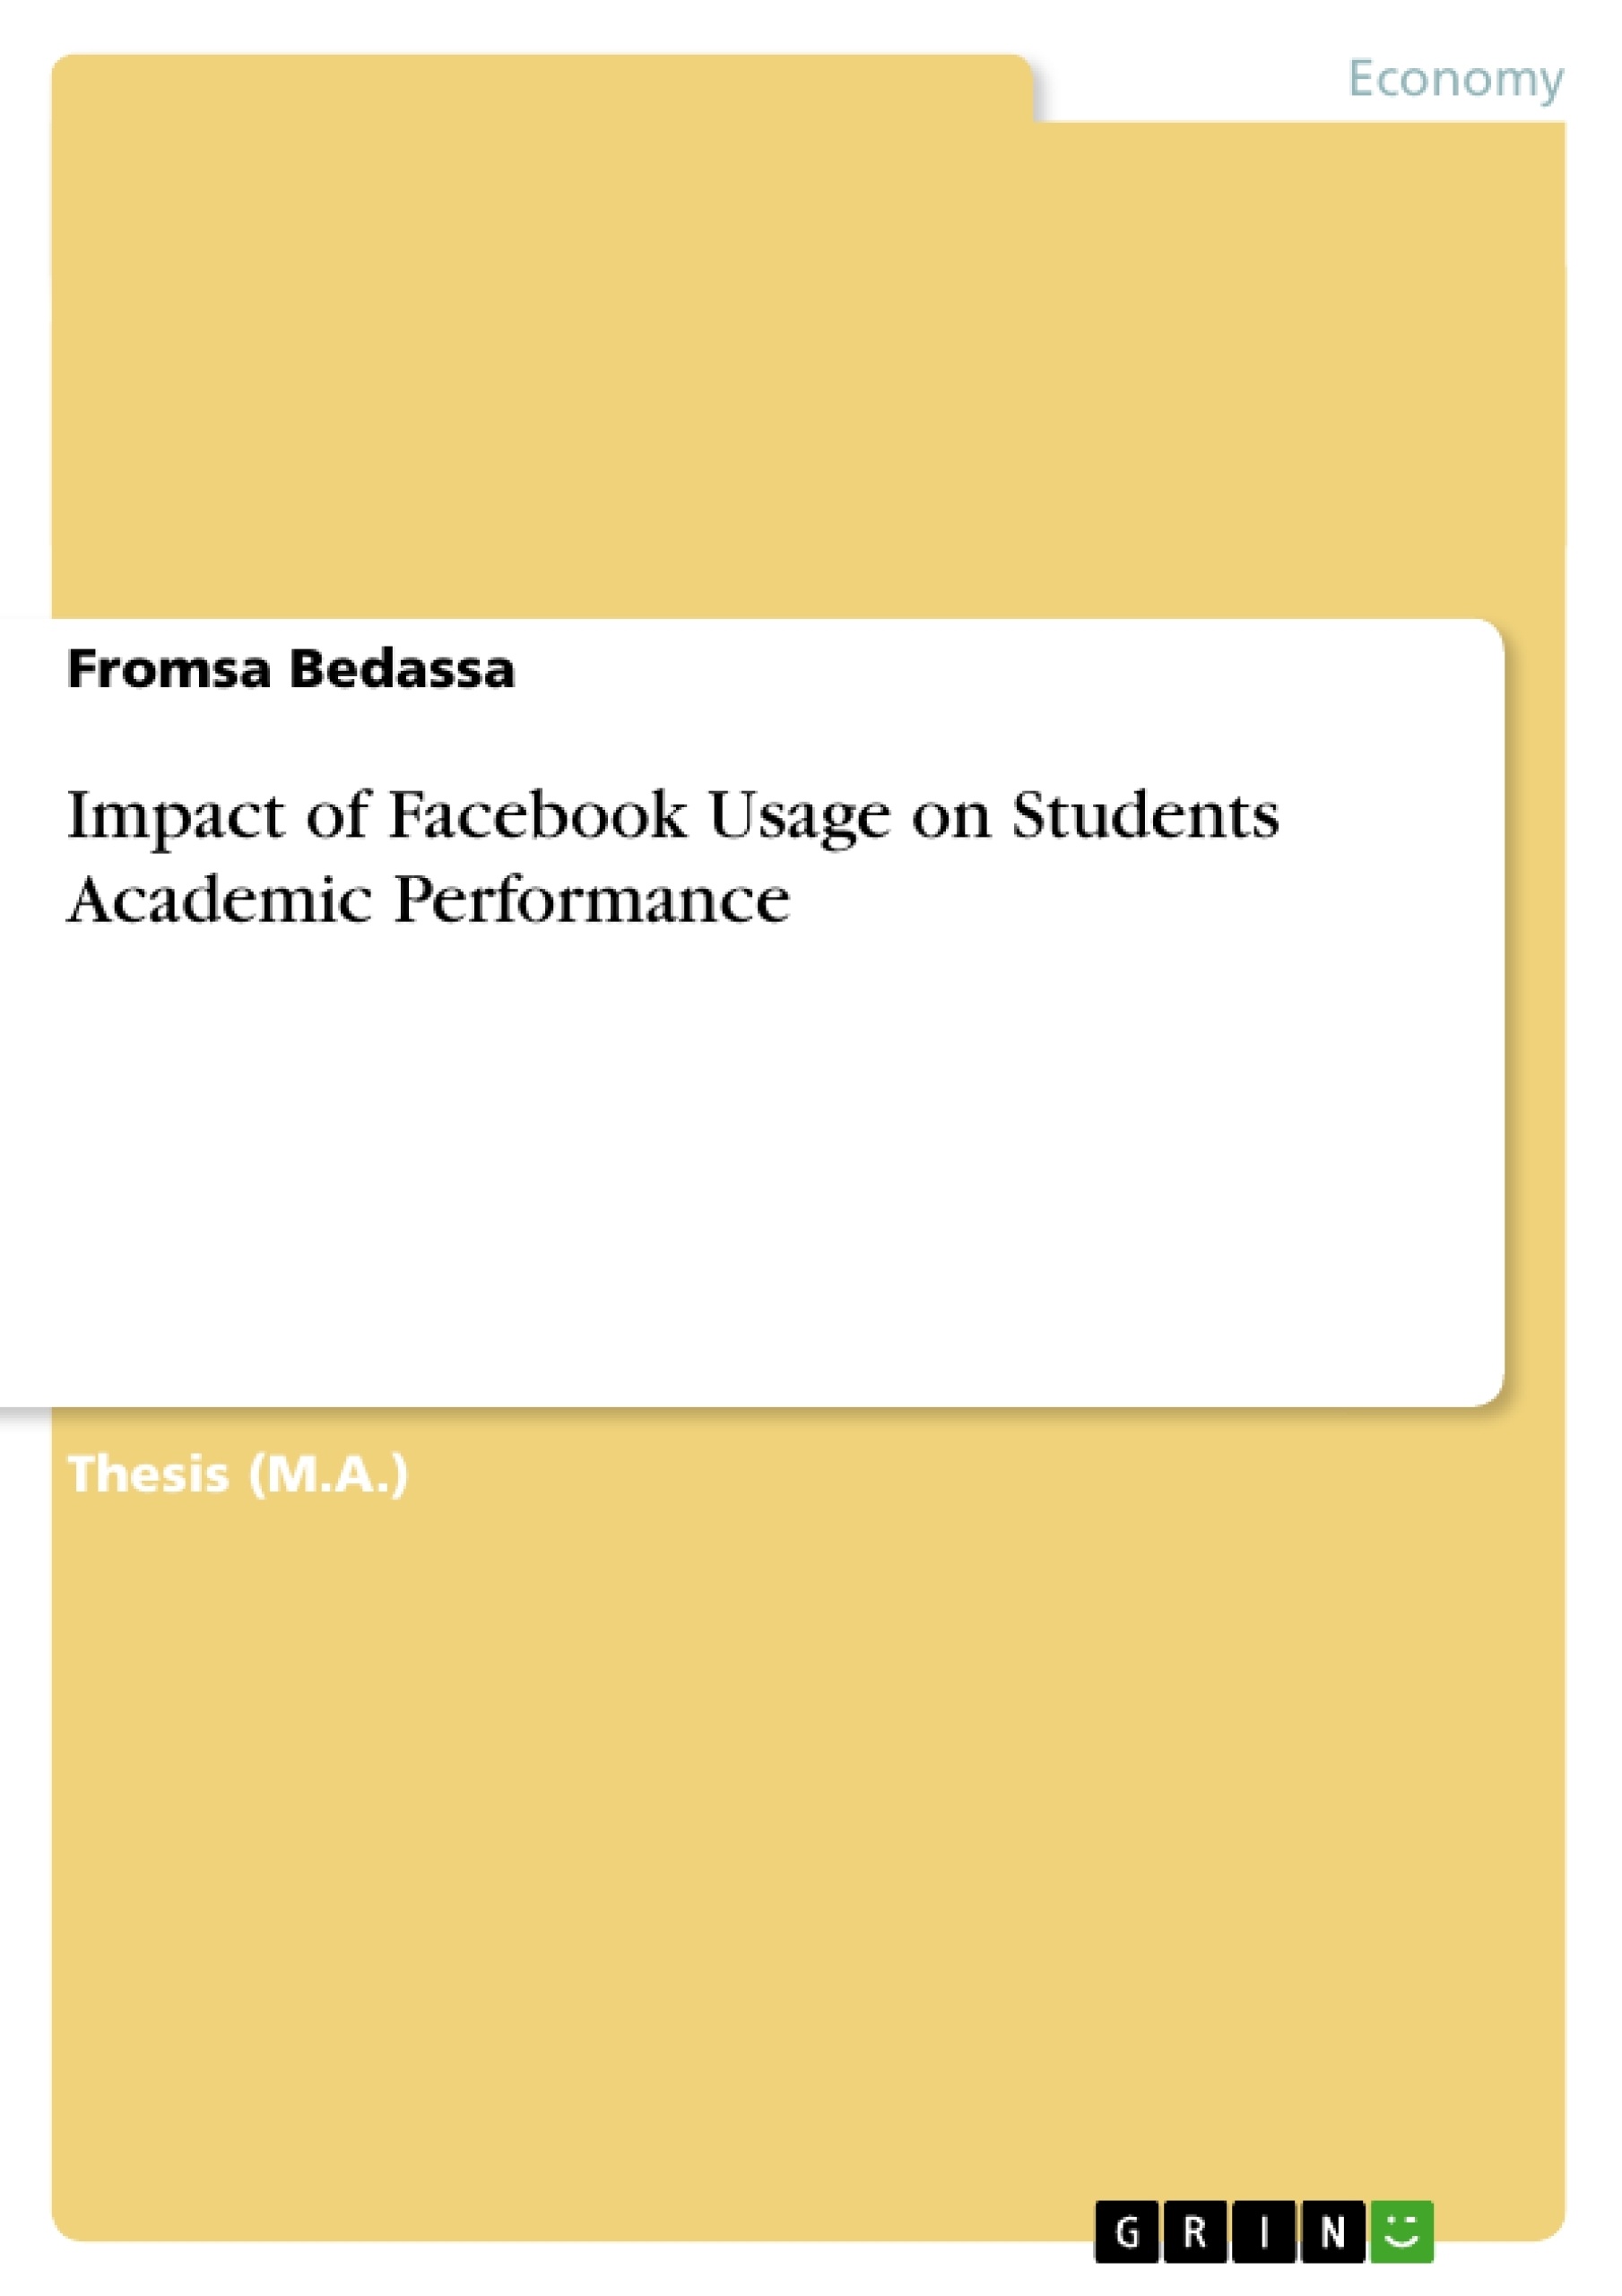 effects of facebook on students academic performance